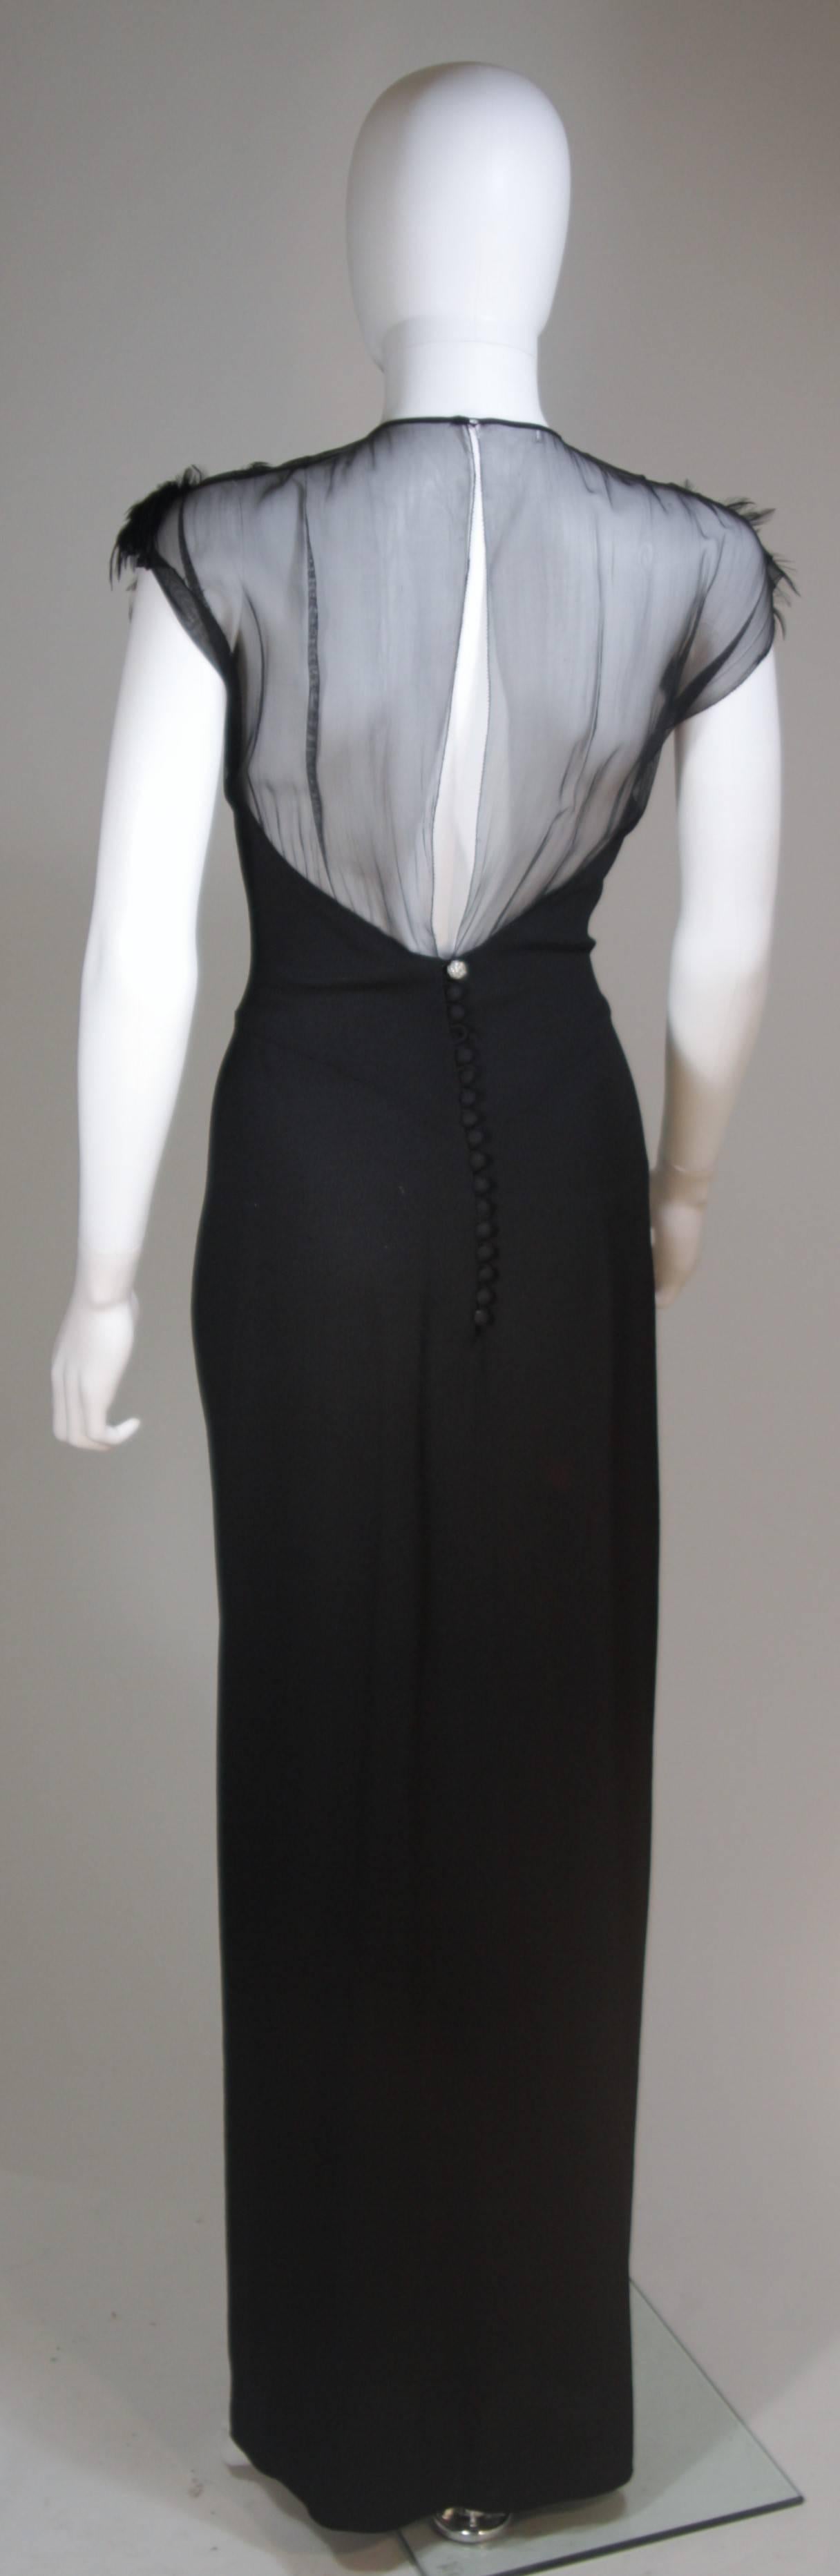 JEAN CAROL 1930's Feather Bust Gown with Drape and Sheer Bodice Size 2 ...